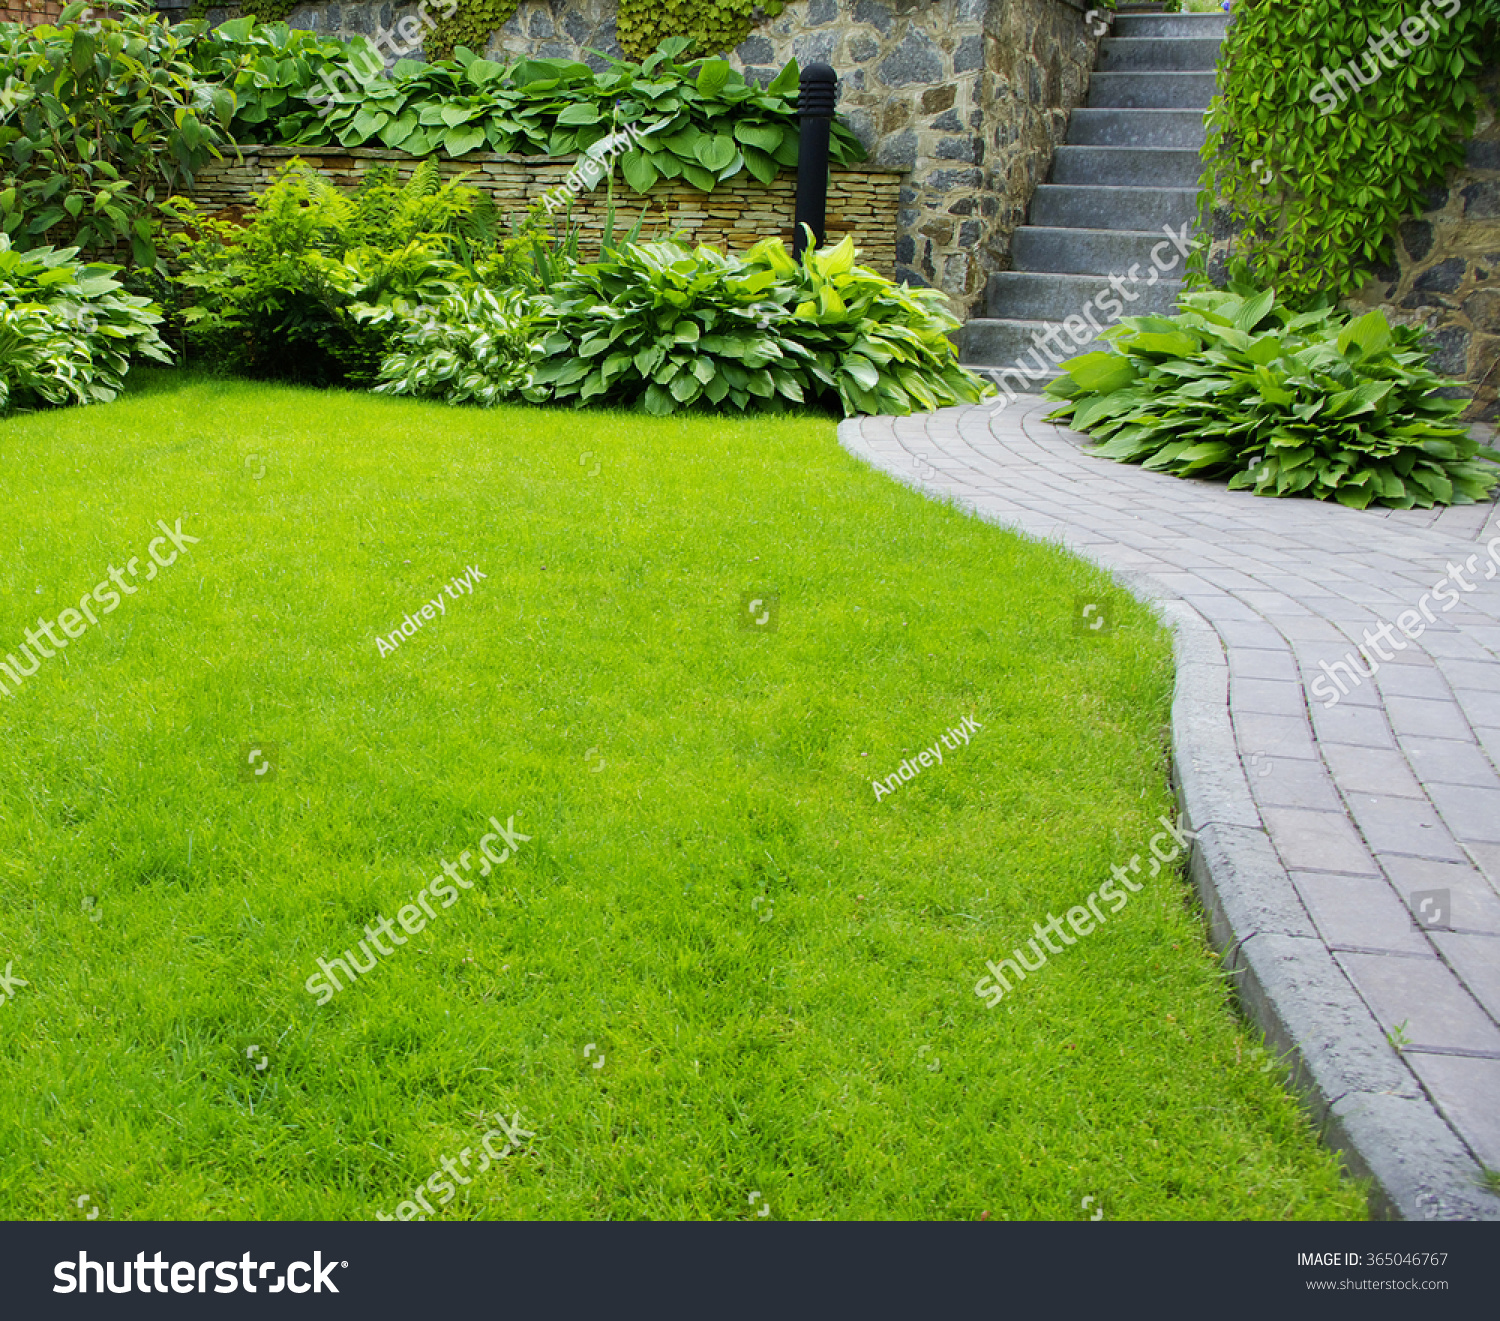 Garden Stone Path Grass Growing Between Stock Photo (Royalty Free ...